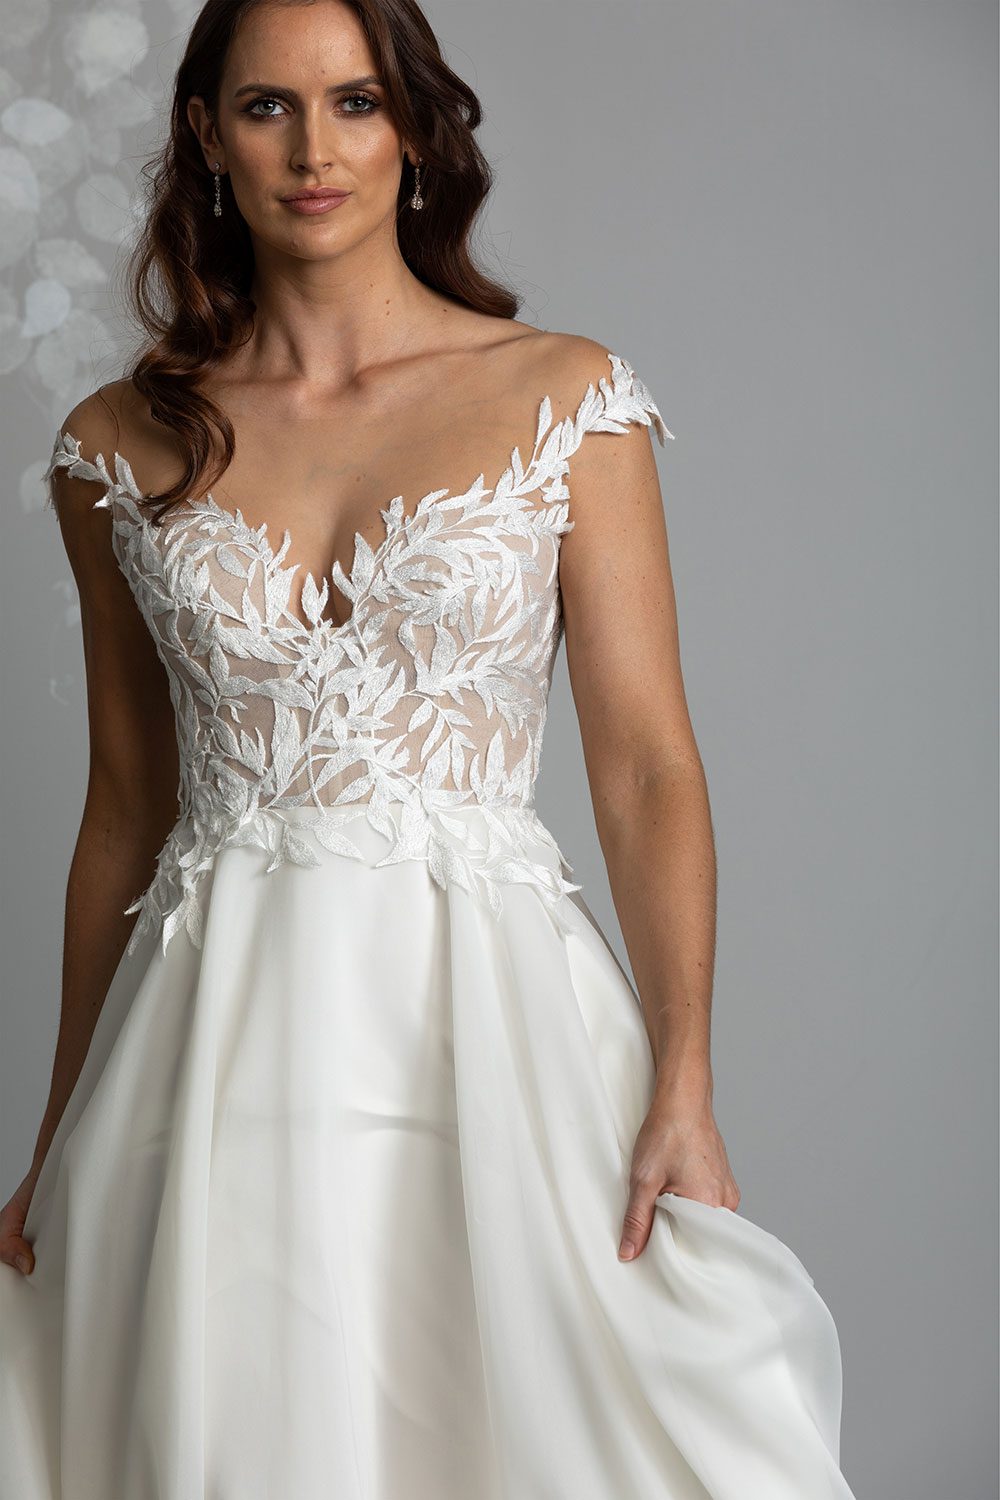 Ariana Wedding gown from Vinka Design - This gorgeous gown features delicate leaf lace hand-appliqued throughout the semi-sheer, structured bodice and up over the shoulder and skirt made of dreamy satin organza layers. Close up of model showing off shoulder leaf lace bodice and soft skirt